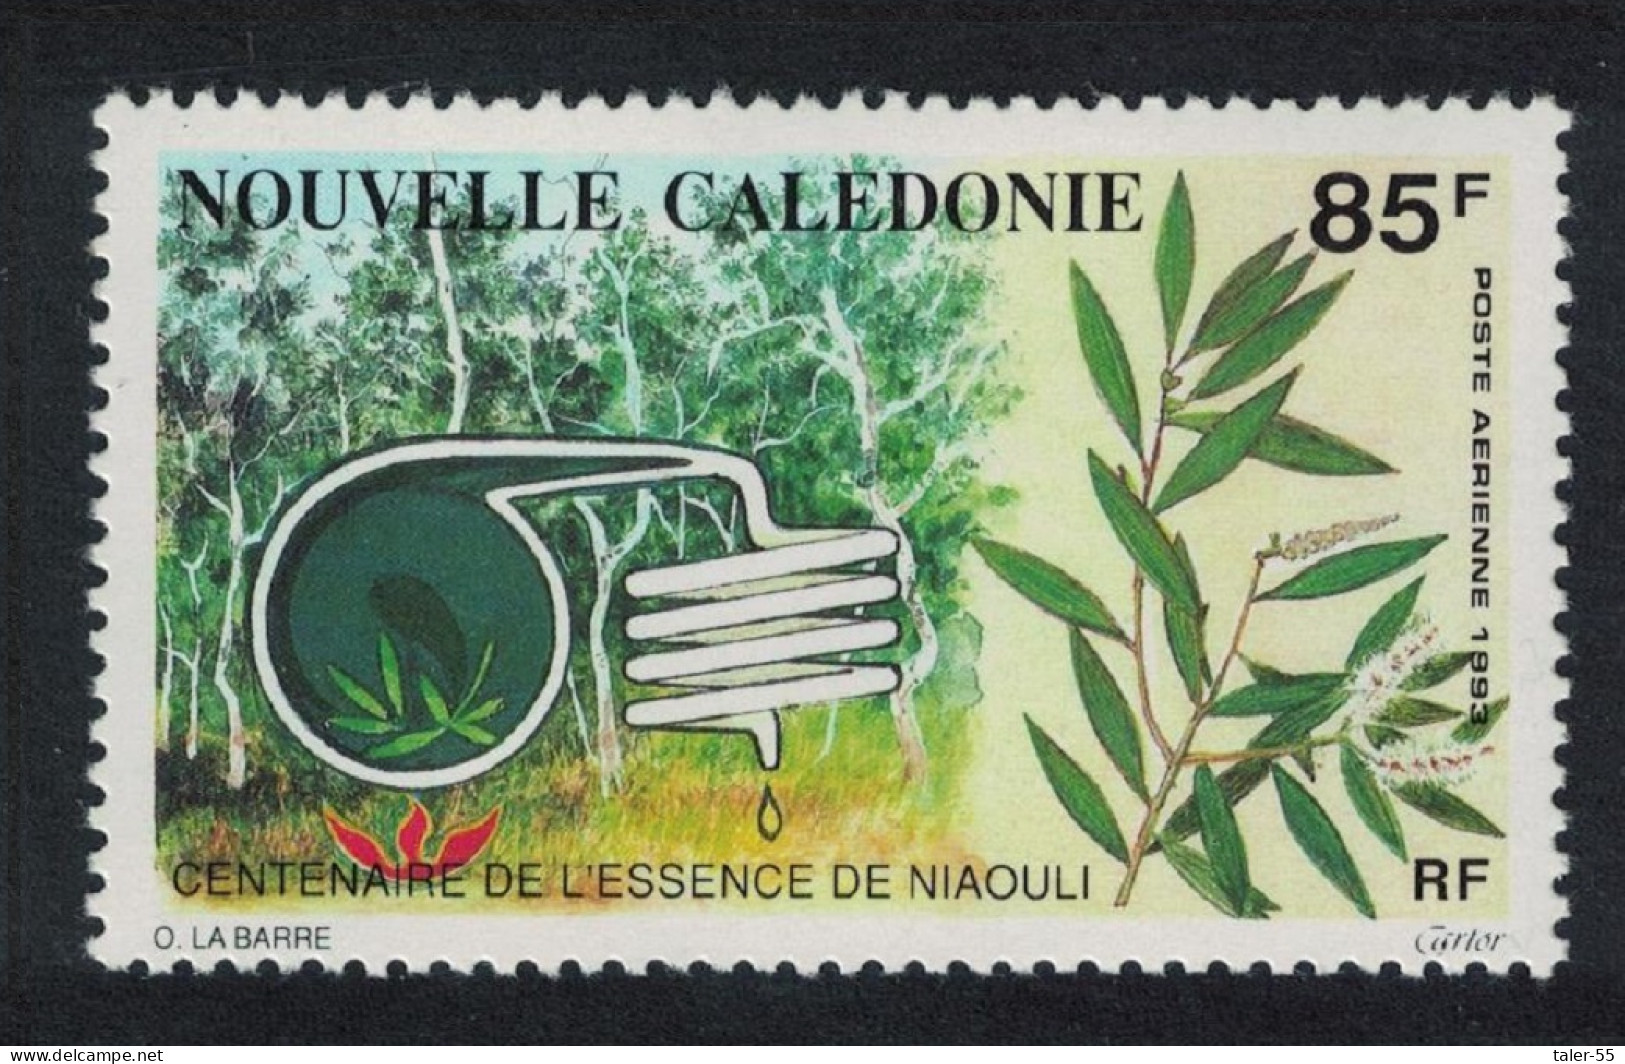 New Caledonia Production Of Essence Of Niaouli 1993 MNH SG#966 - Unused Stamps